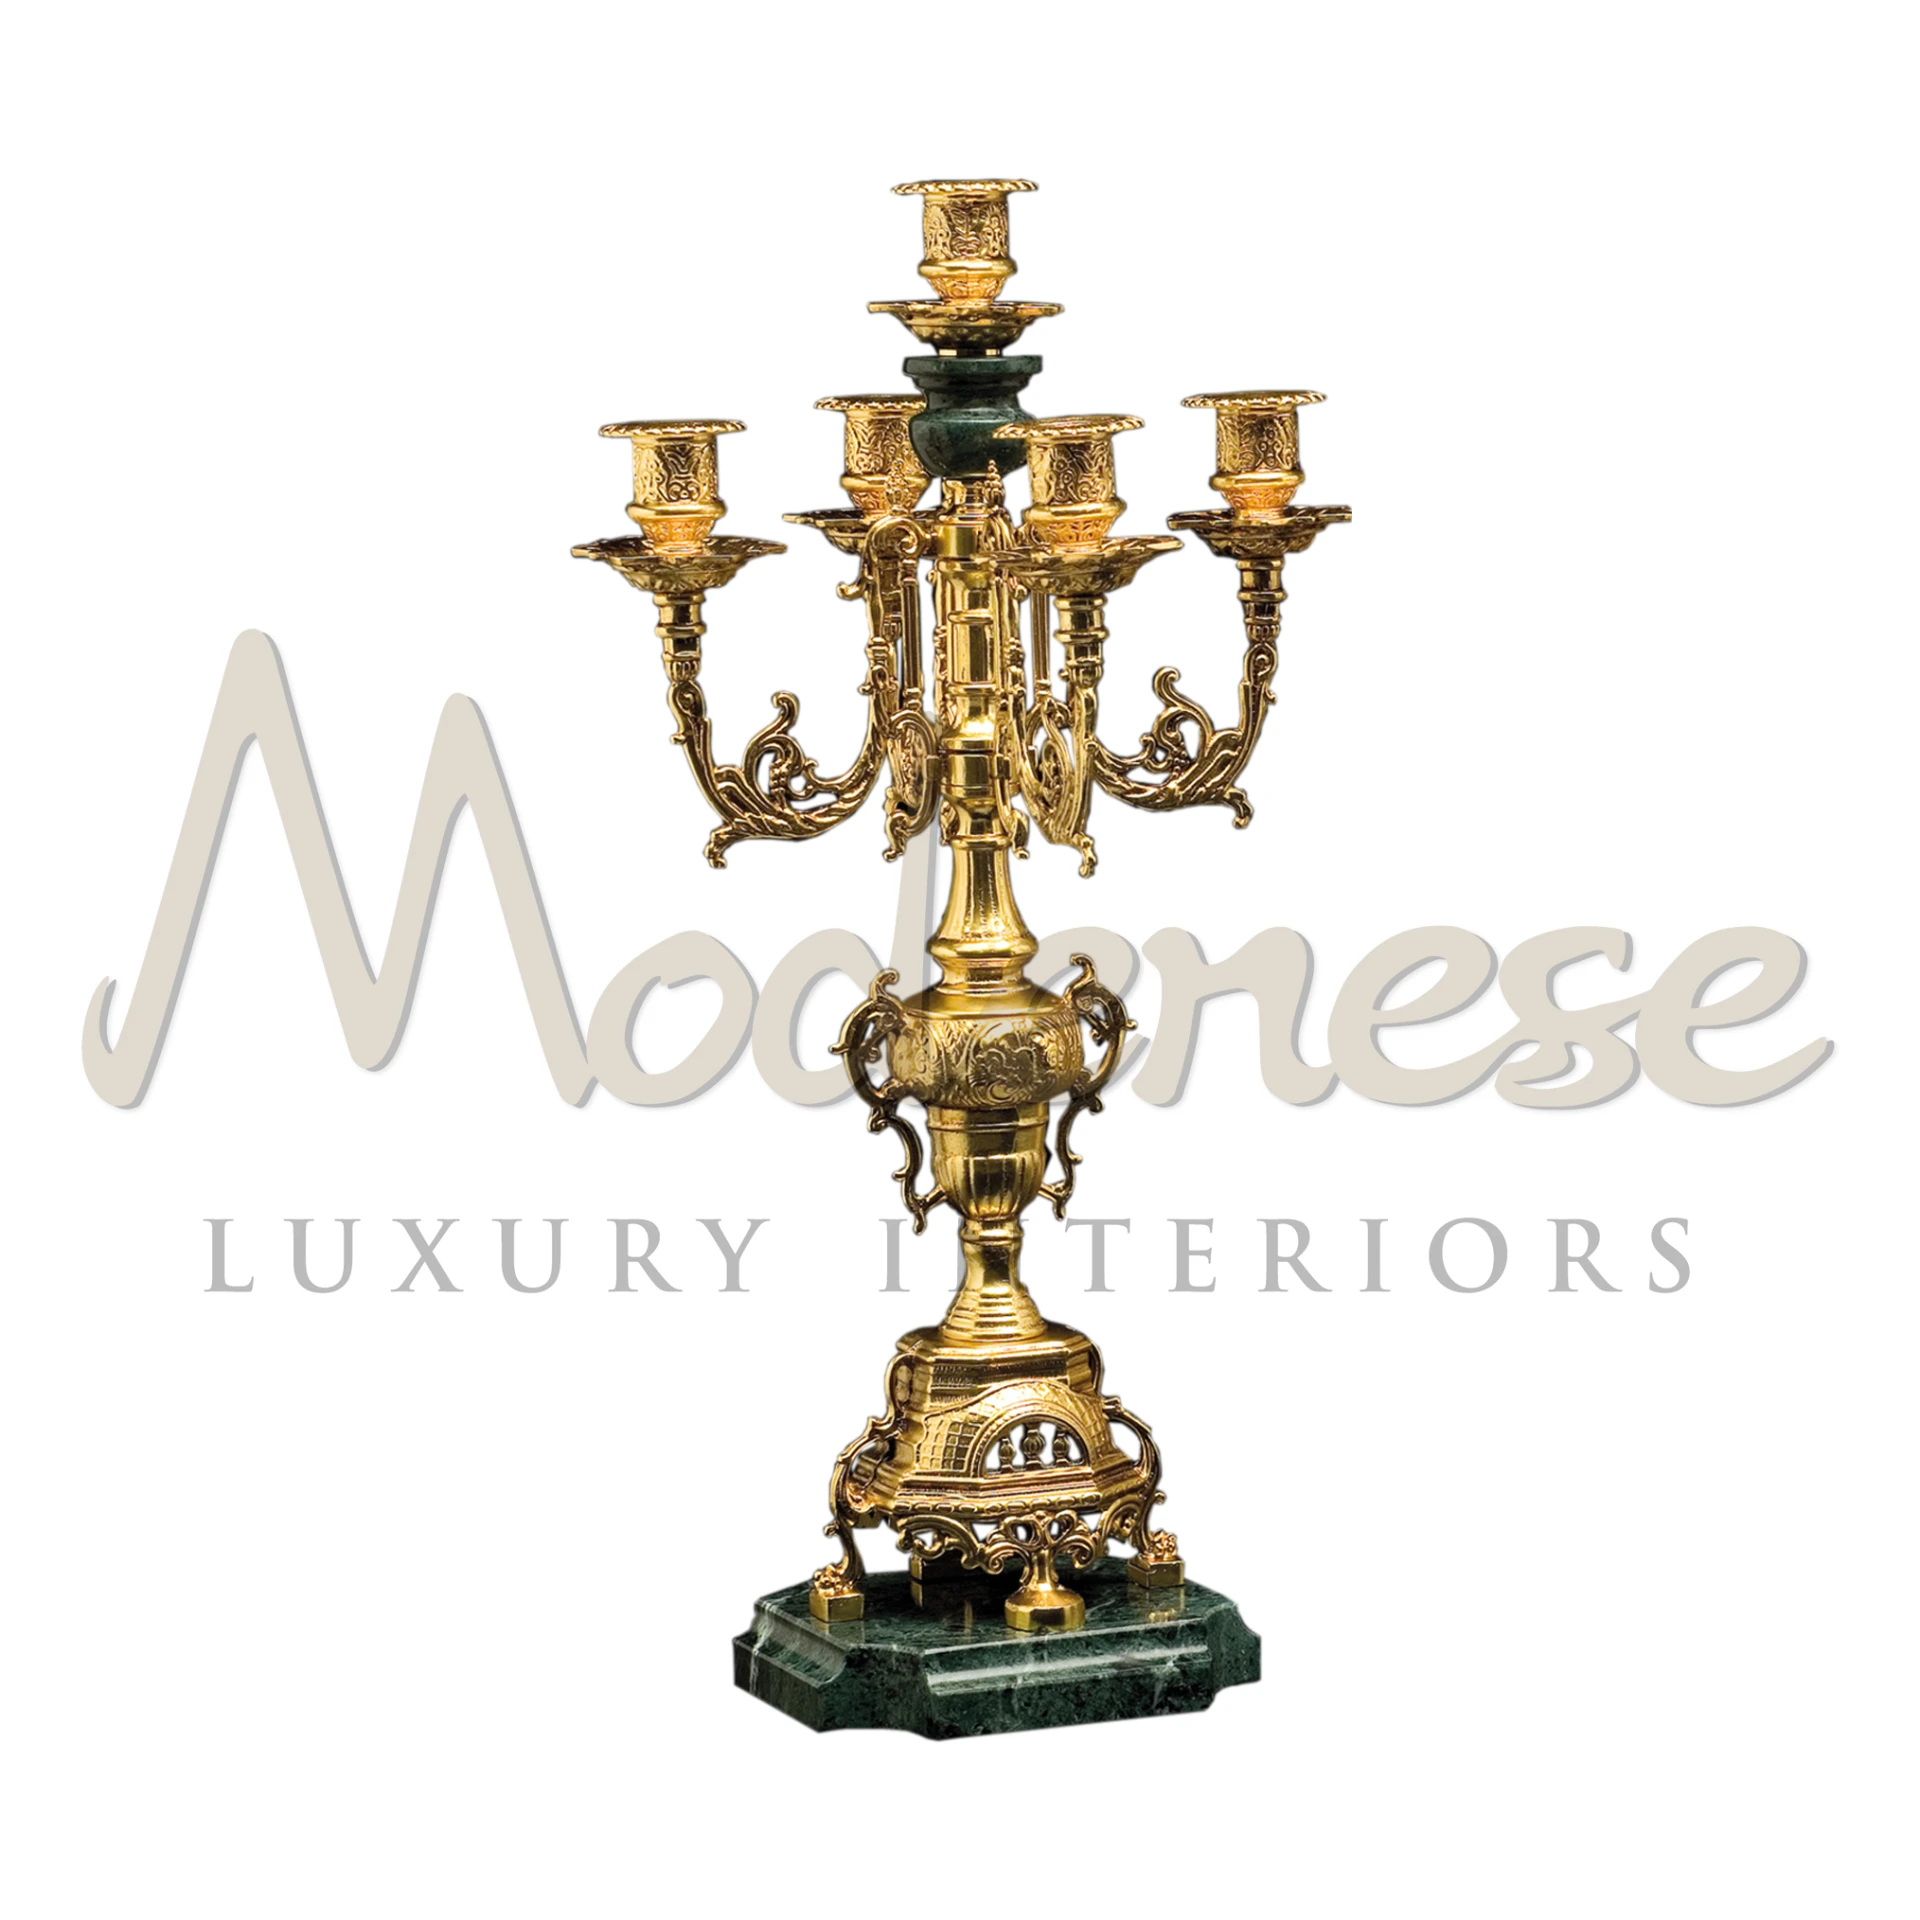 French Furniture Inspired Candelabra with Flower Decorations and Marble Base